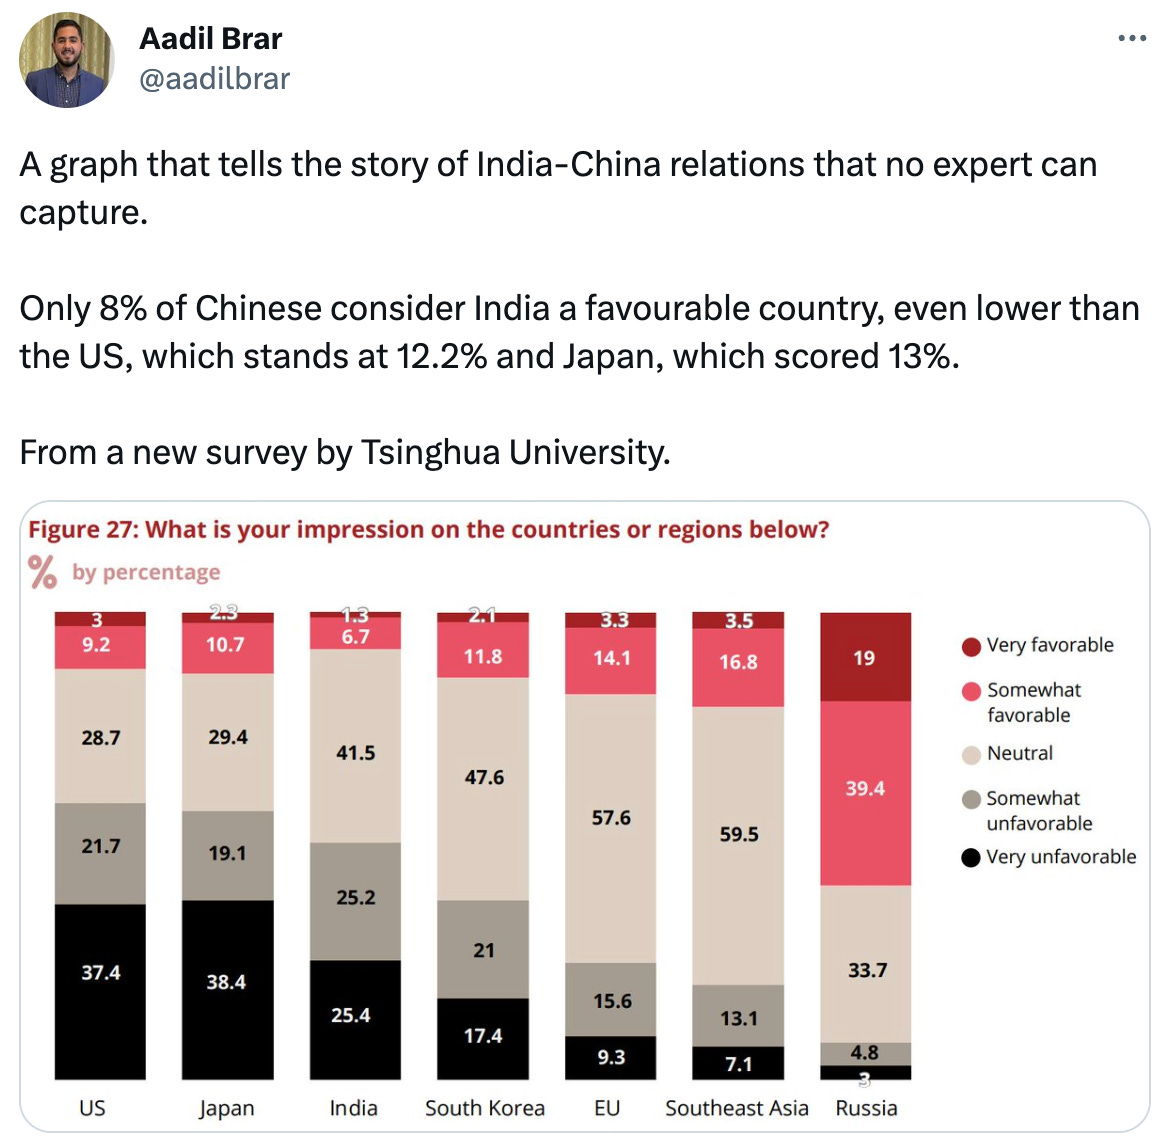  Aadil Brar @aadilbrar A graph that tells the story of India-China relations that no expert can capture.     Only 8% of Chinese consider India a favourable country, even lower than the US, which stands at 12.2% and Japan, which scored 13%.  From a new survey by Tsinghua University.